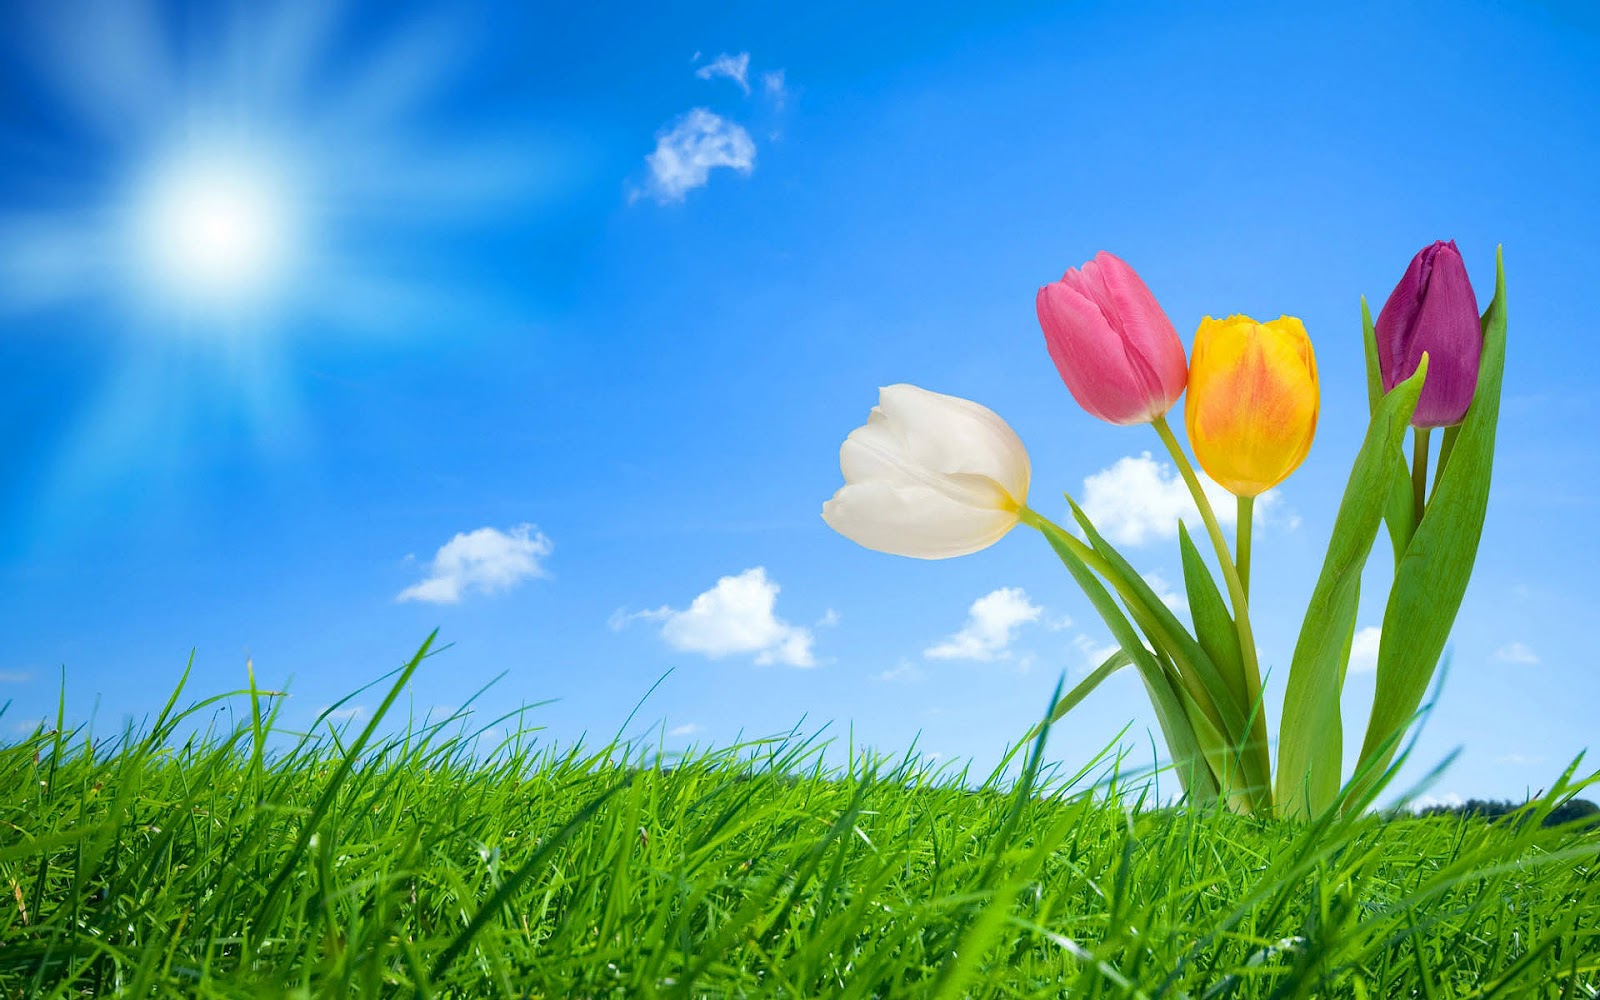   spring wallpapers hd spring wallpaper background picture 26jpg 1600x1000